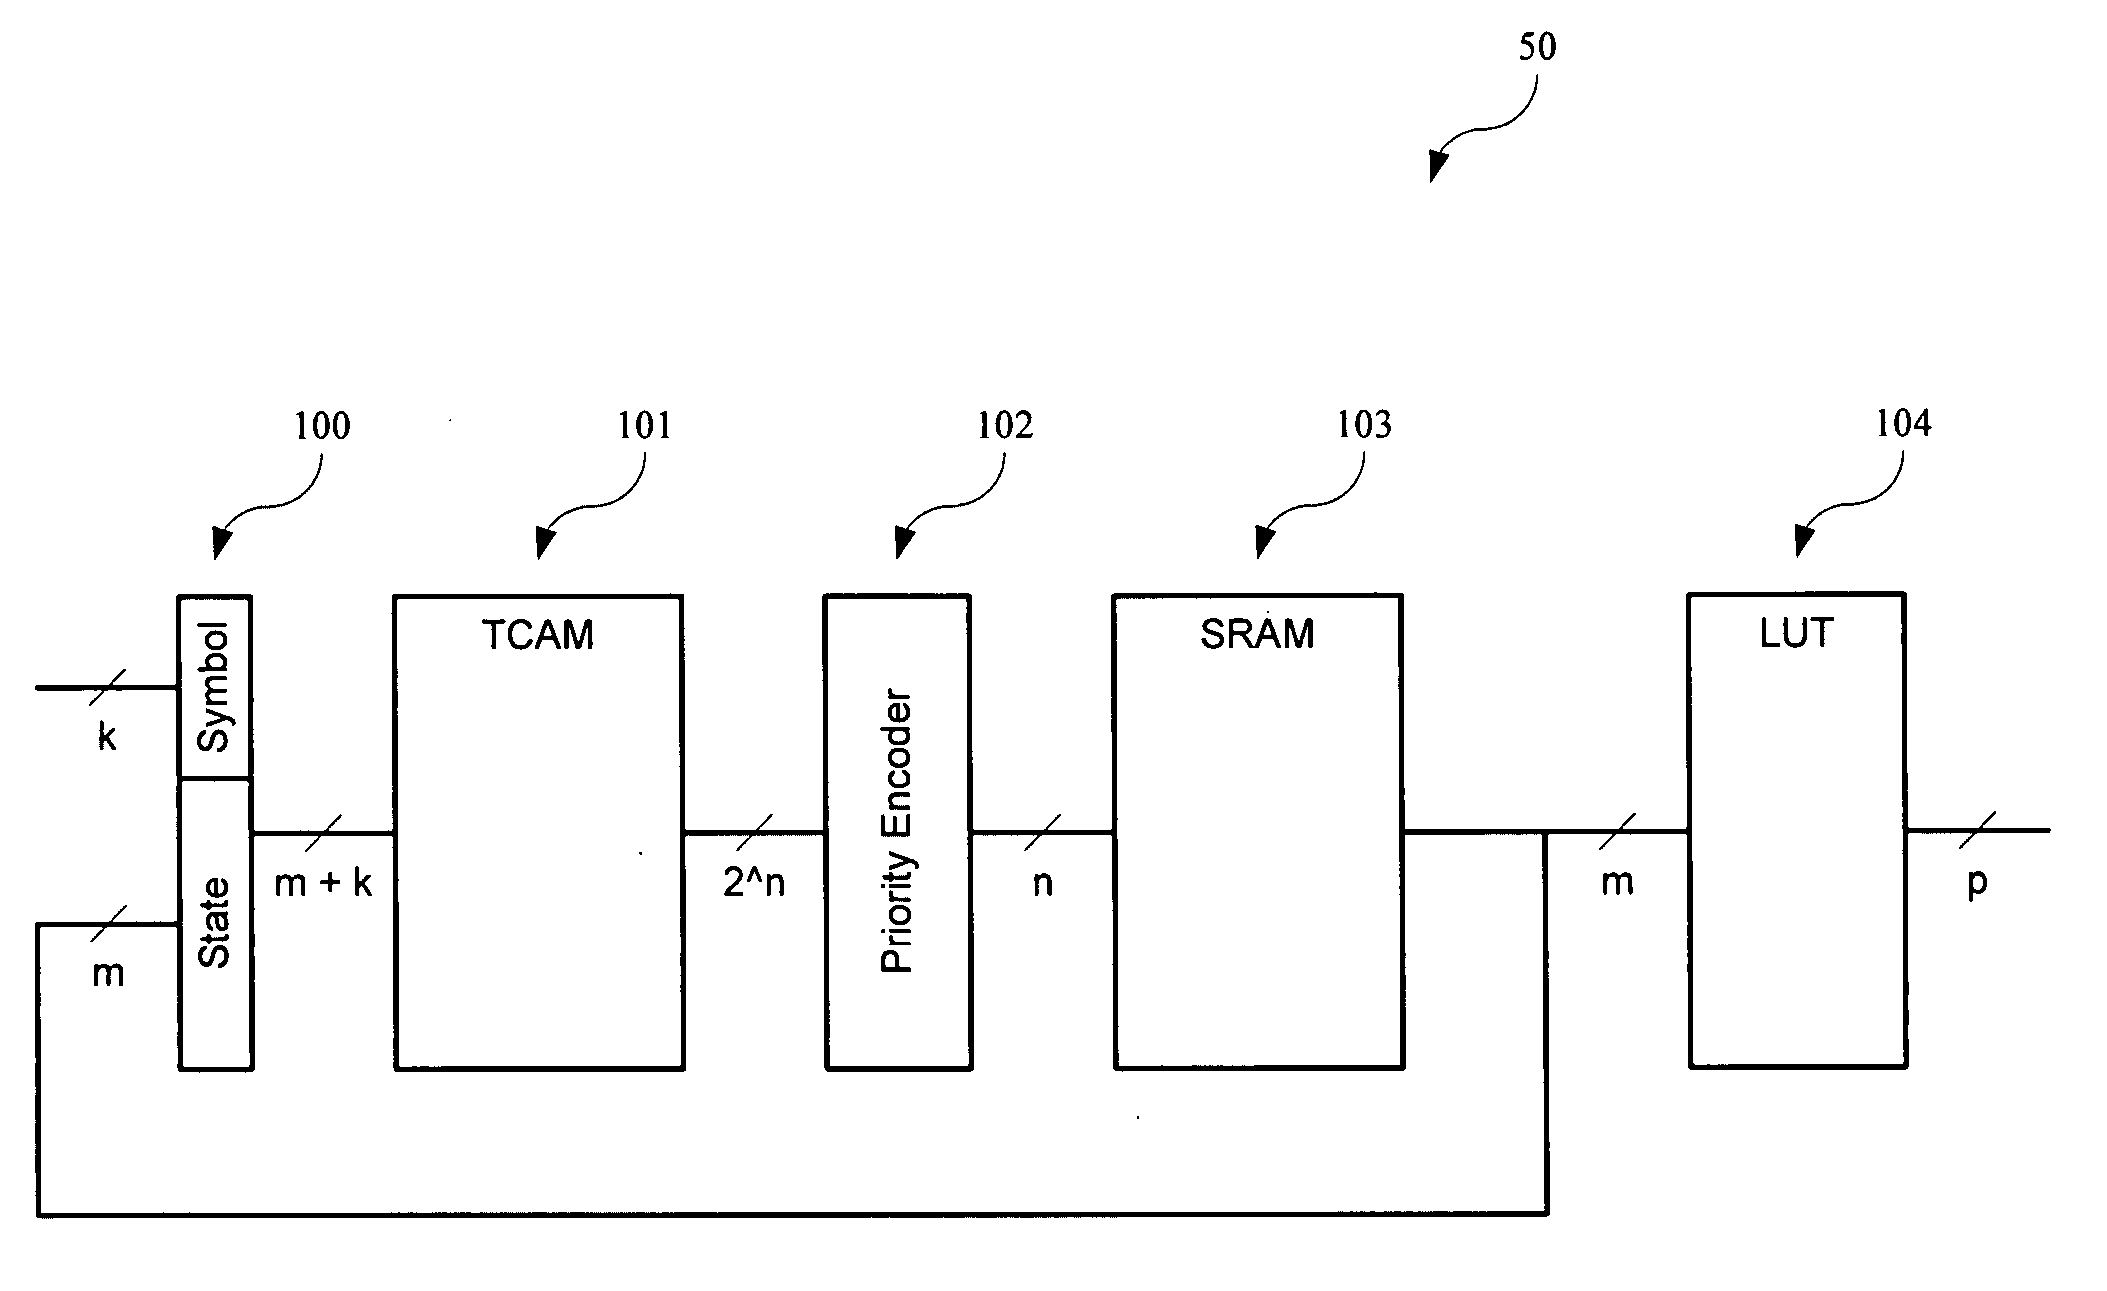 Apparatus and method for memory efficient, programmable, pattern matching finite state machine hardware